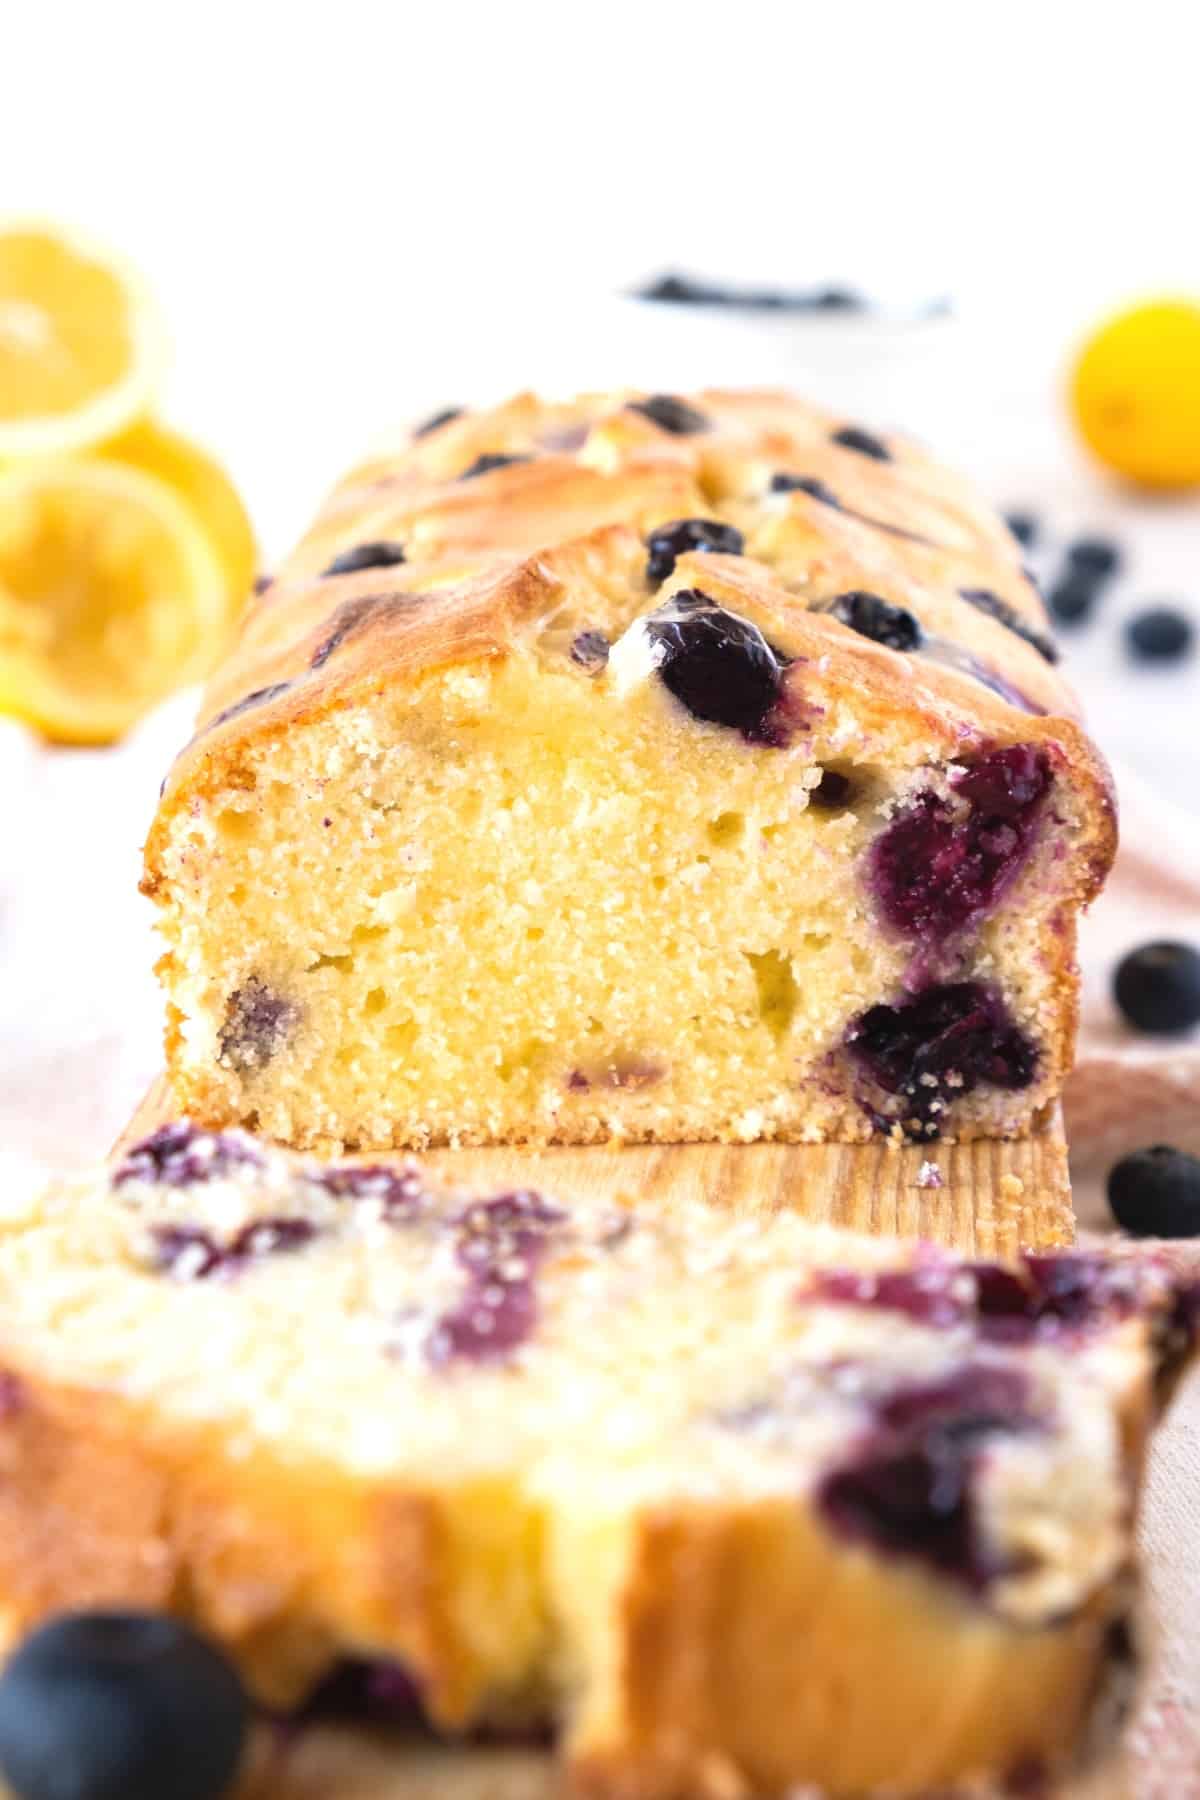 Up close shot showing texture of sliced gluten-free blueberry bread.